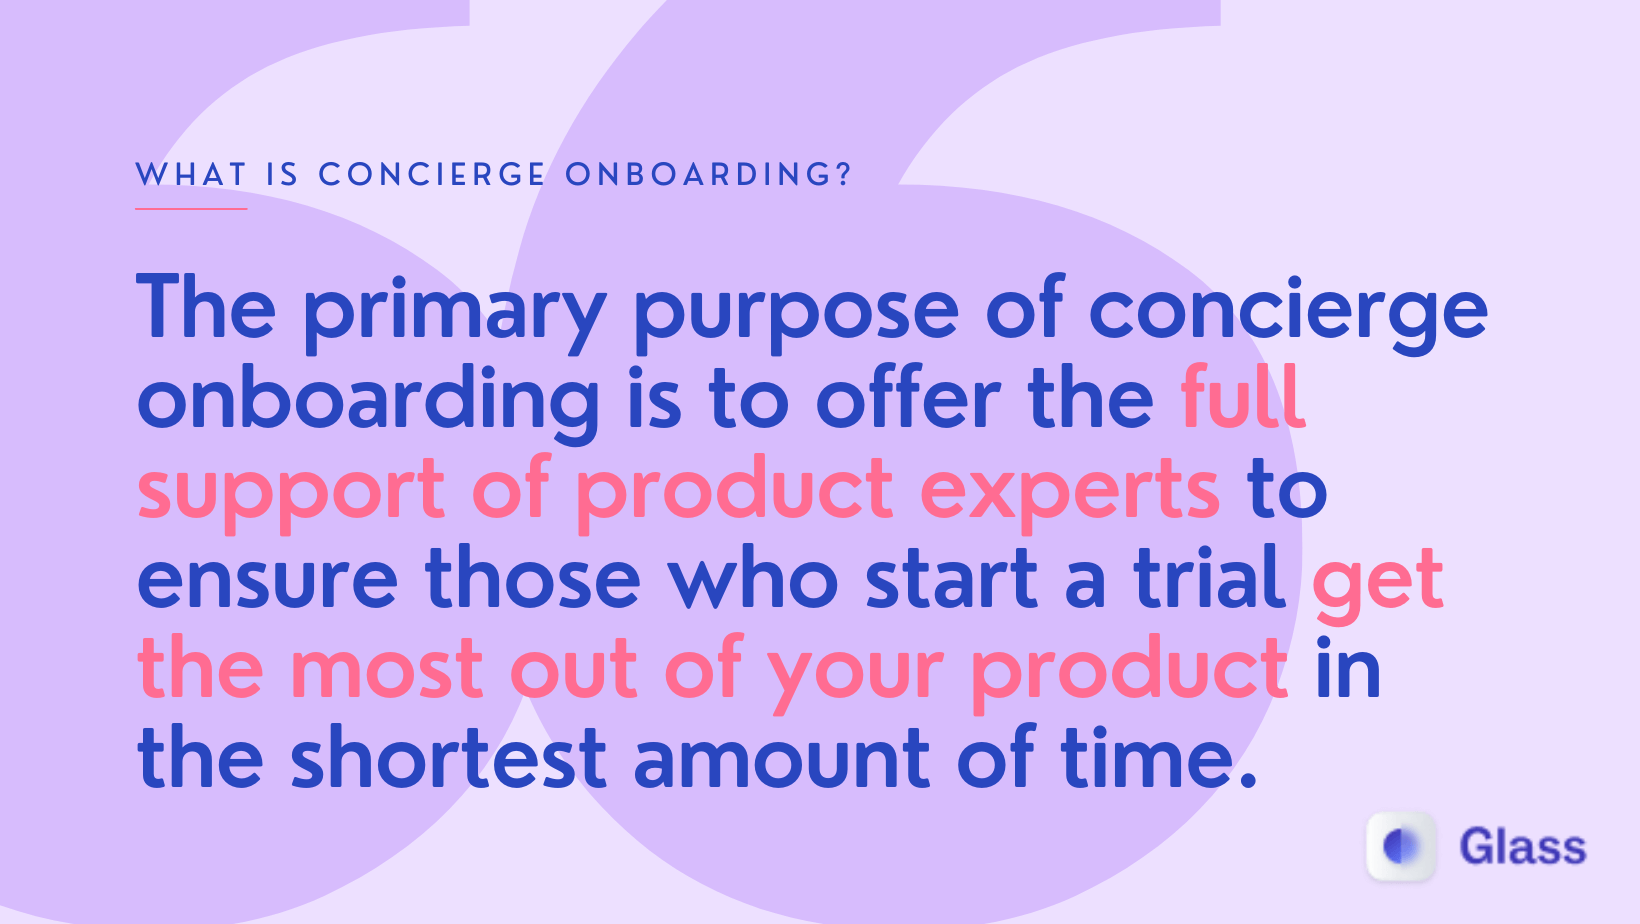 What Is Concierge Onboarding?